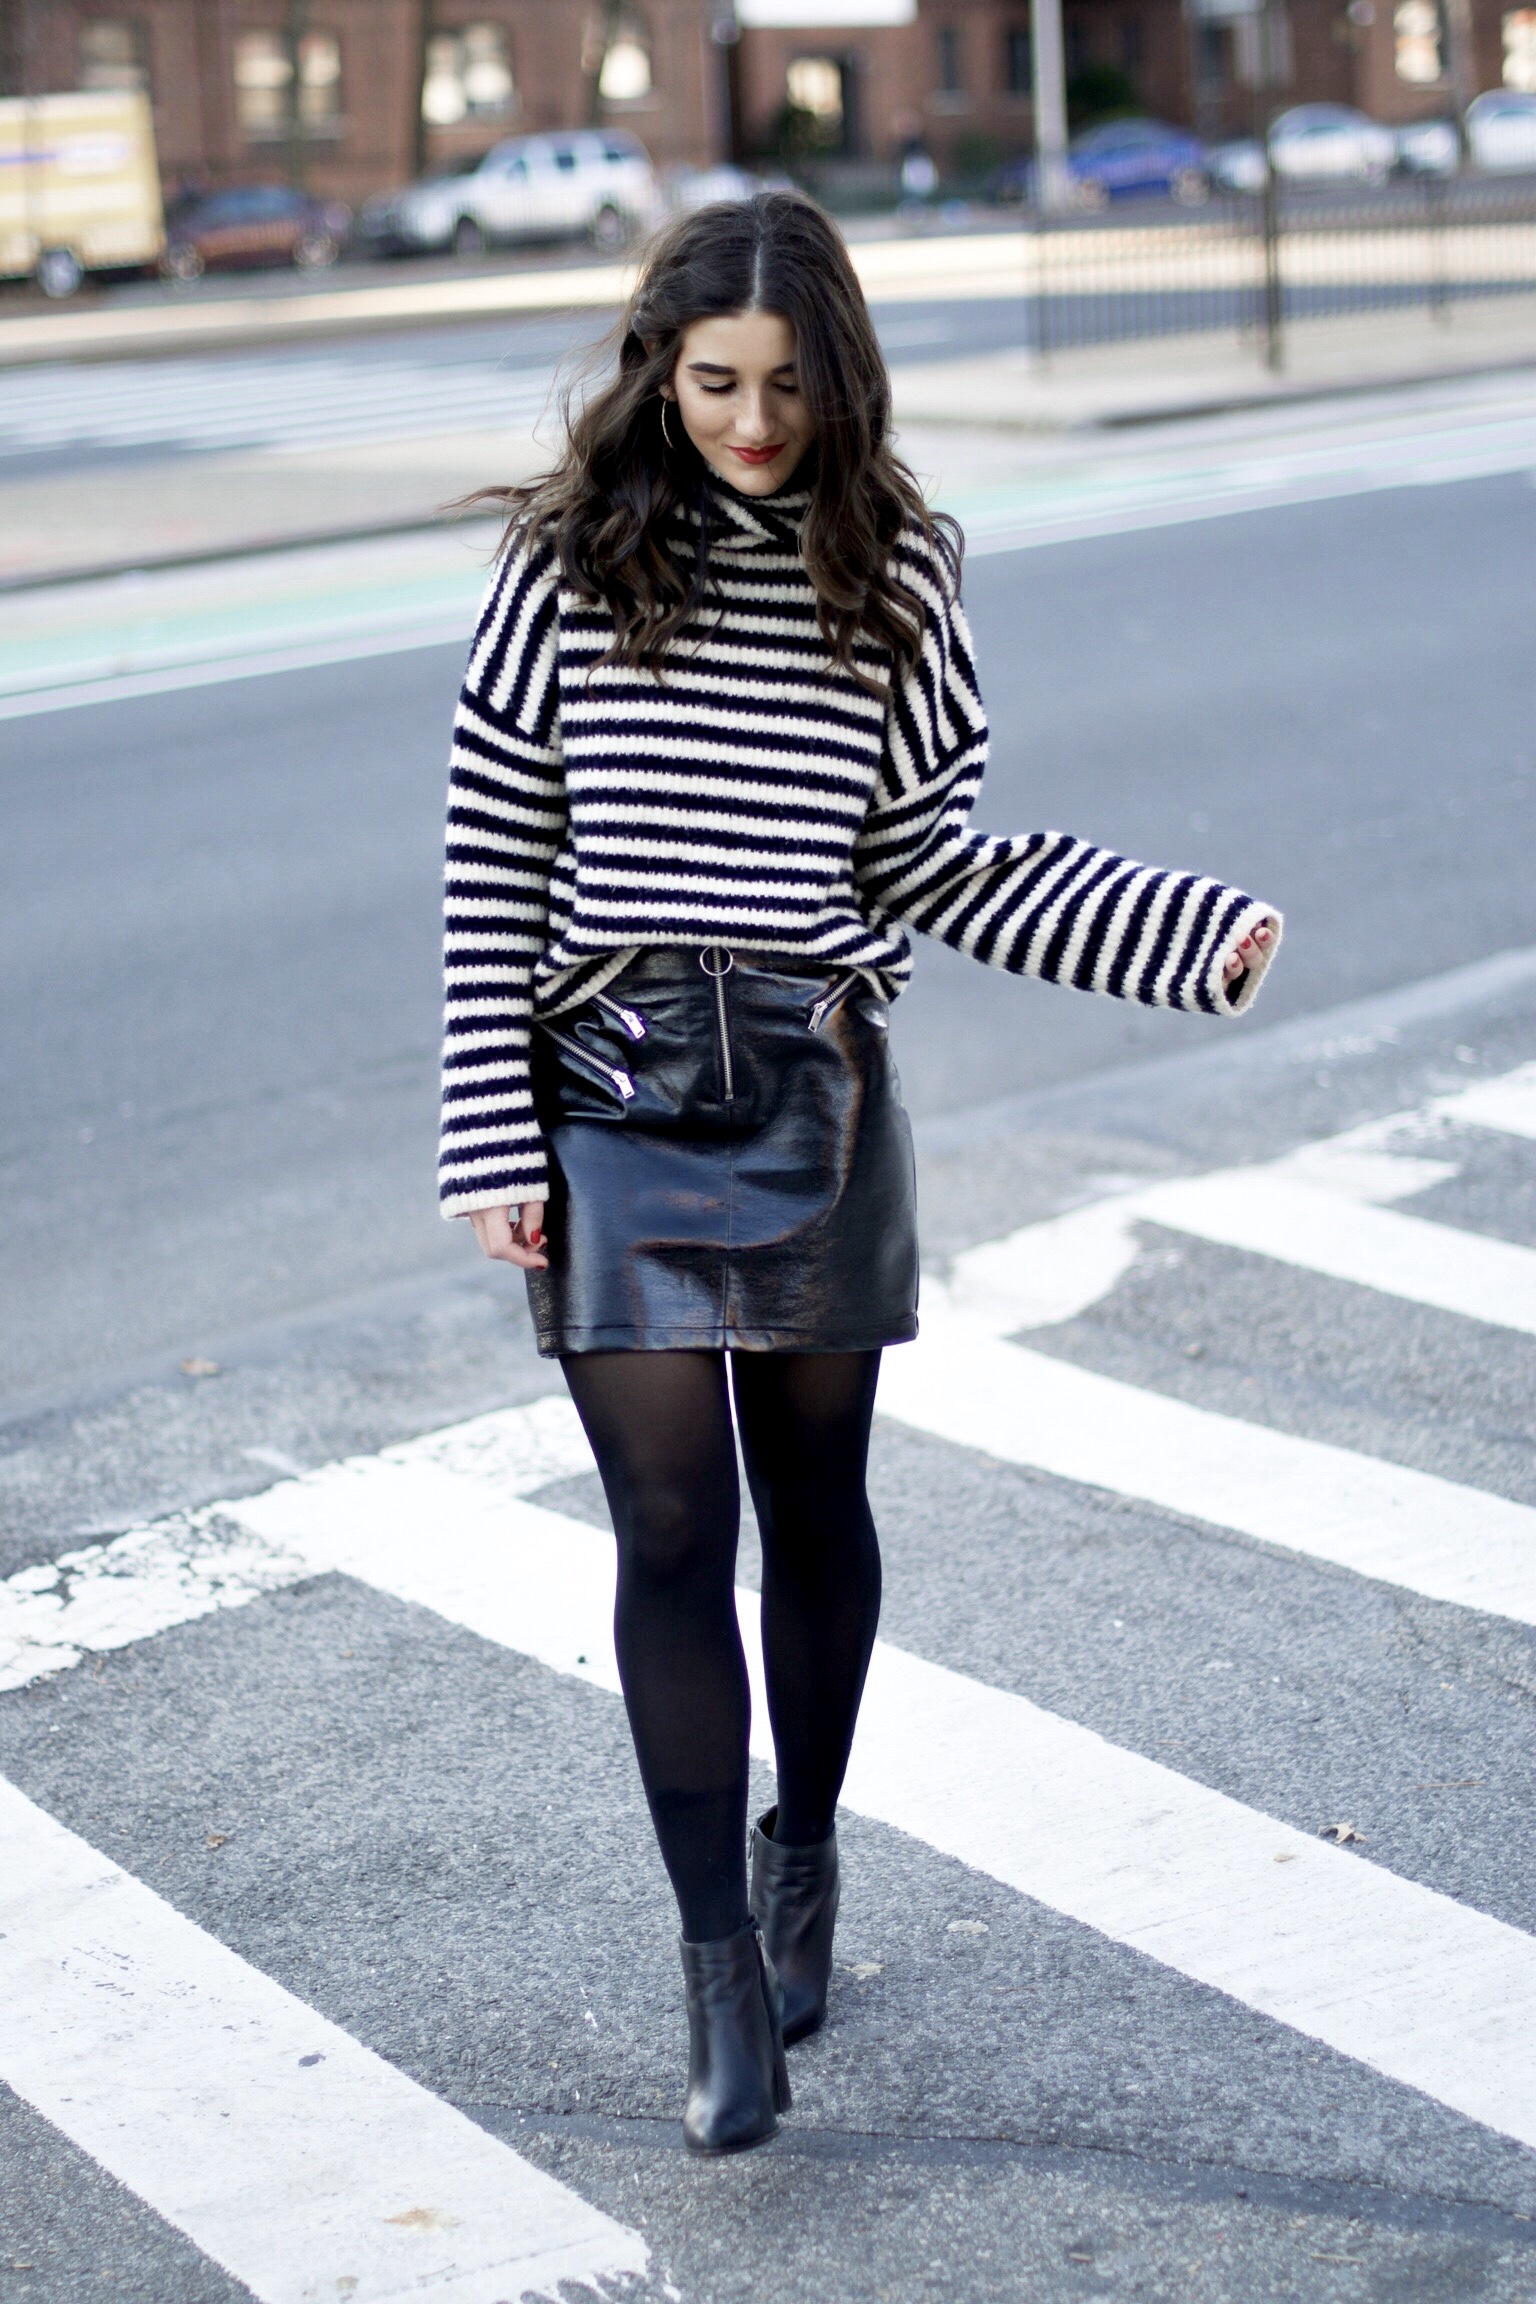 Striped Turtleneck Sweater + Pleather Skirt The Right Way To Ask Someone To Meet For Coffee Esther Santer Fashion Blog NYC Street Style Blogger Outfit OOTD Trendy Girl Women Black White Tights Ankle Booties Winter Hoops Earrings Wavy Hair Shop Shoes.jpg